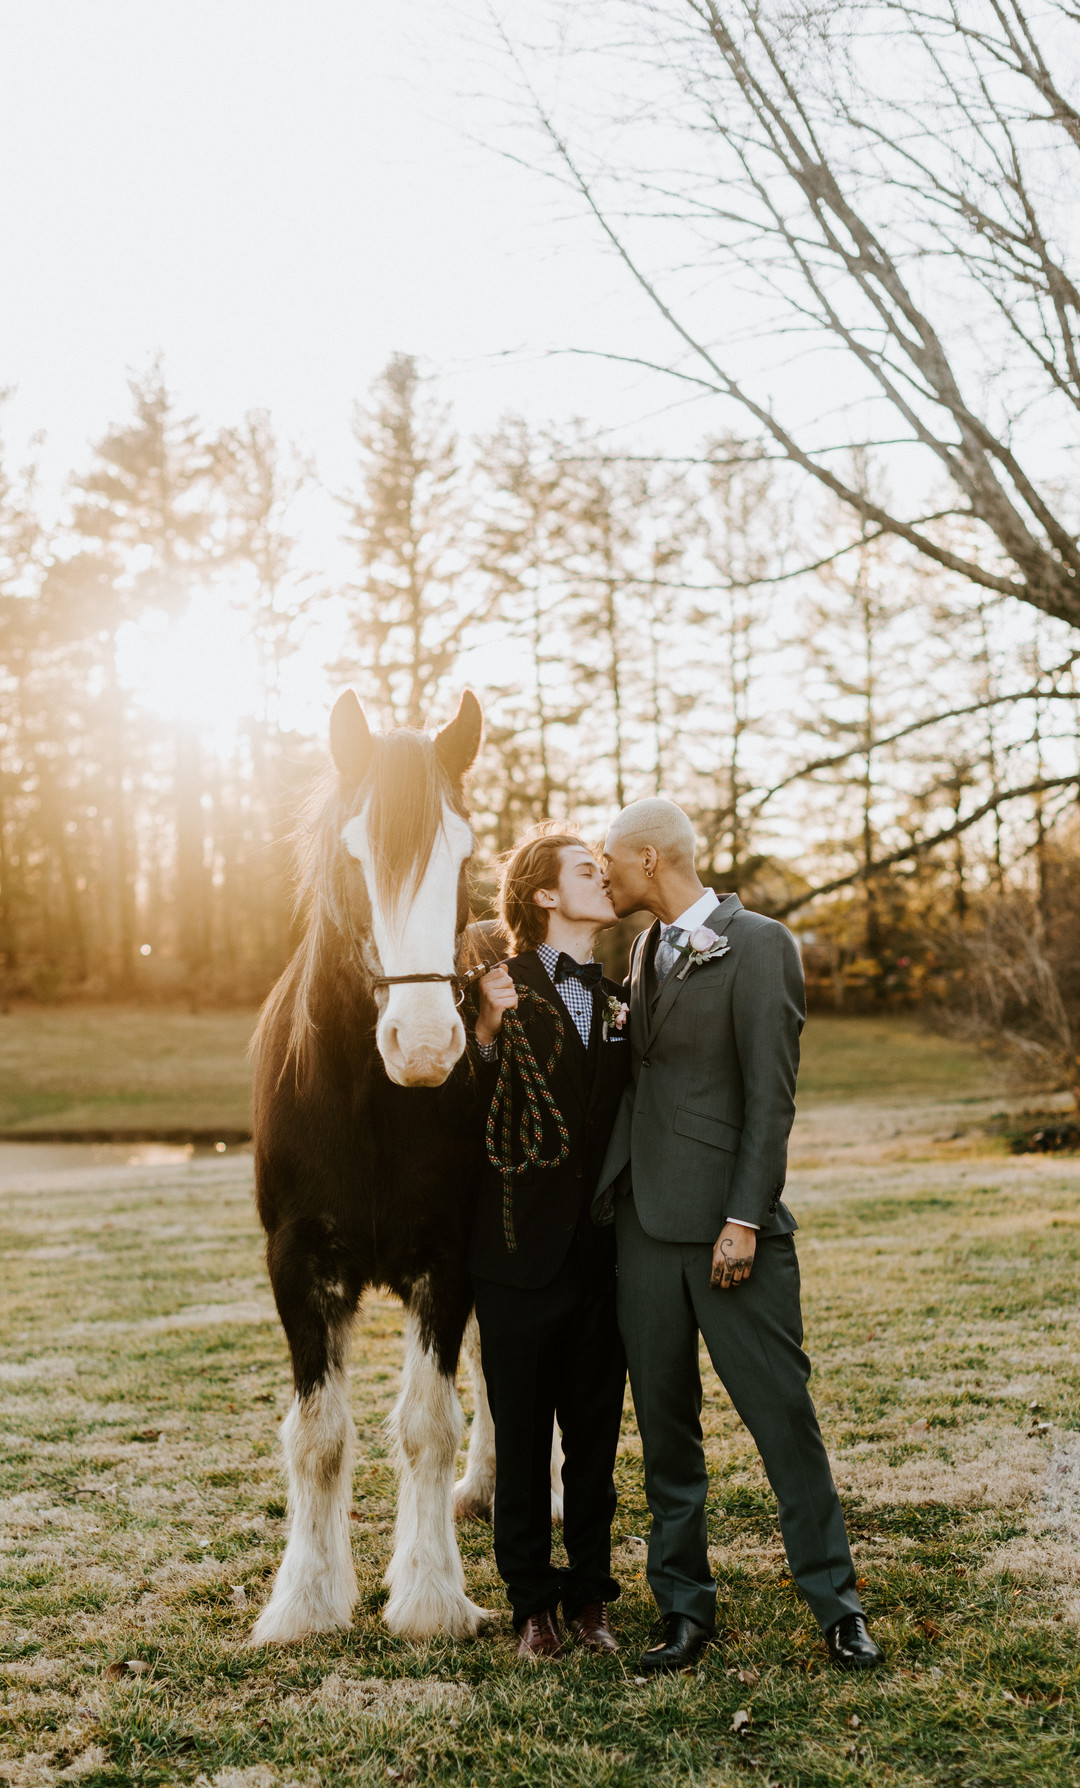 Rustic, moody farm wedding inspiration in Purcellville, Virginia two brides two grooms double wedding styled shoot horse